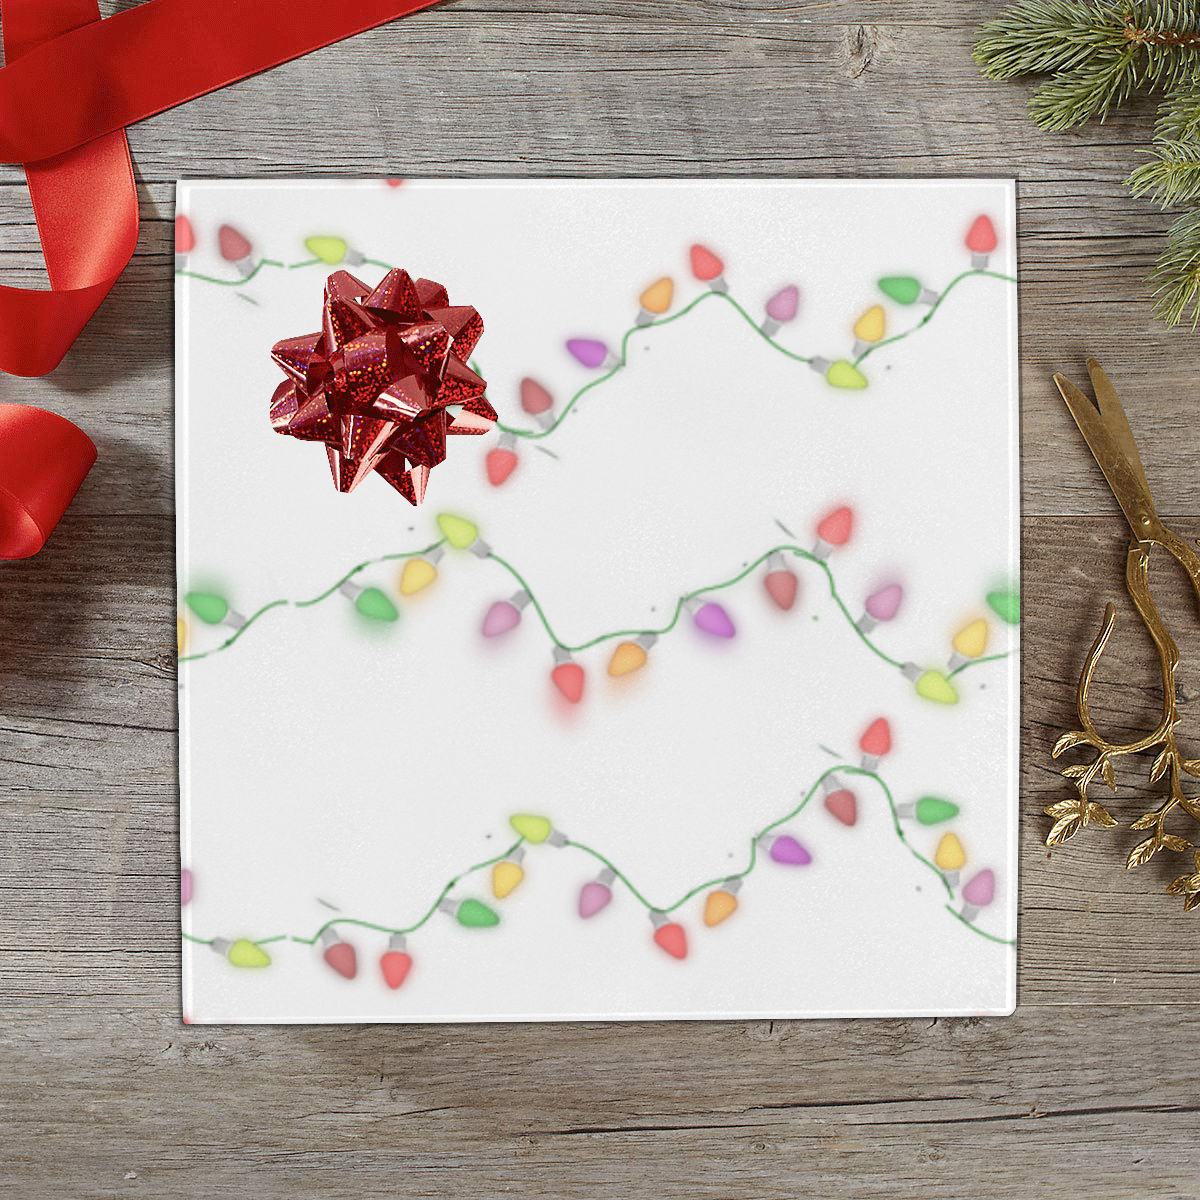 Festive Christmas Lights on White Gift Wrapping Paper 58"x 23" (5 Rolls)